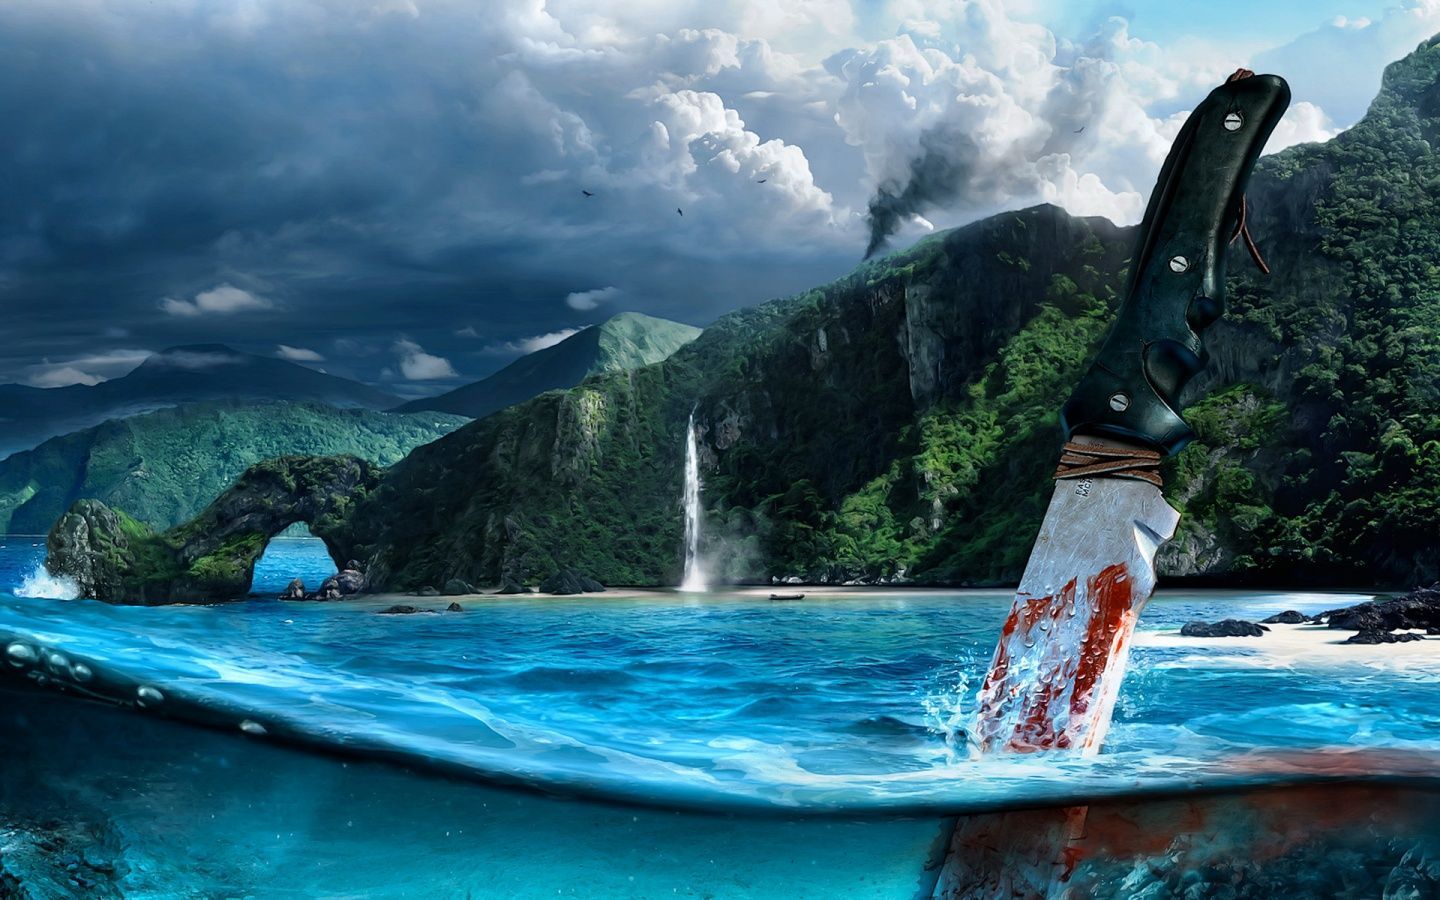 Farcry 3 Wallpapers | HD Wallpapers